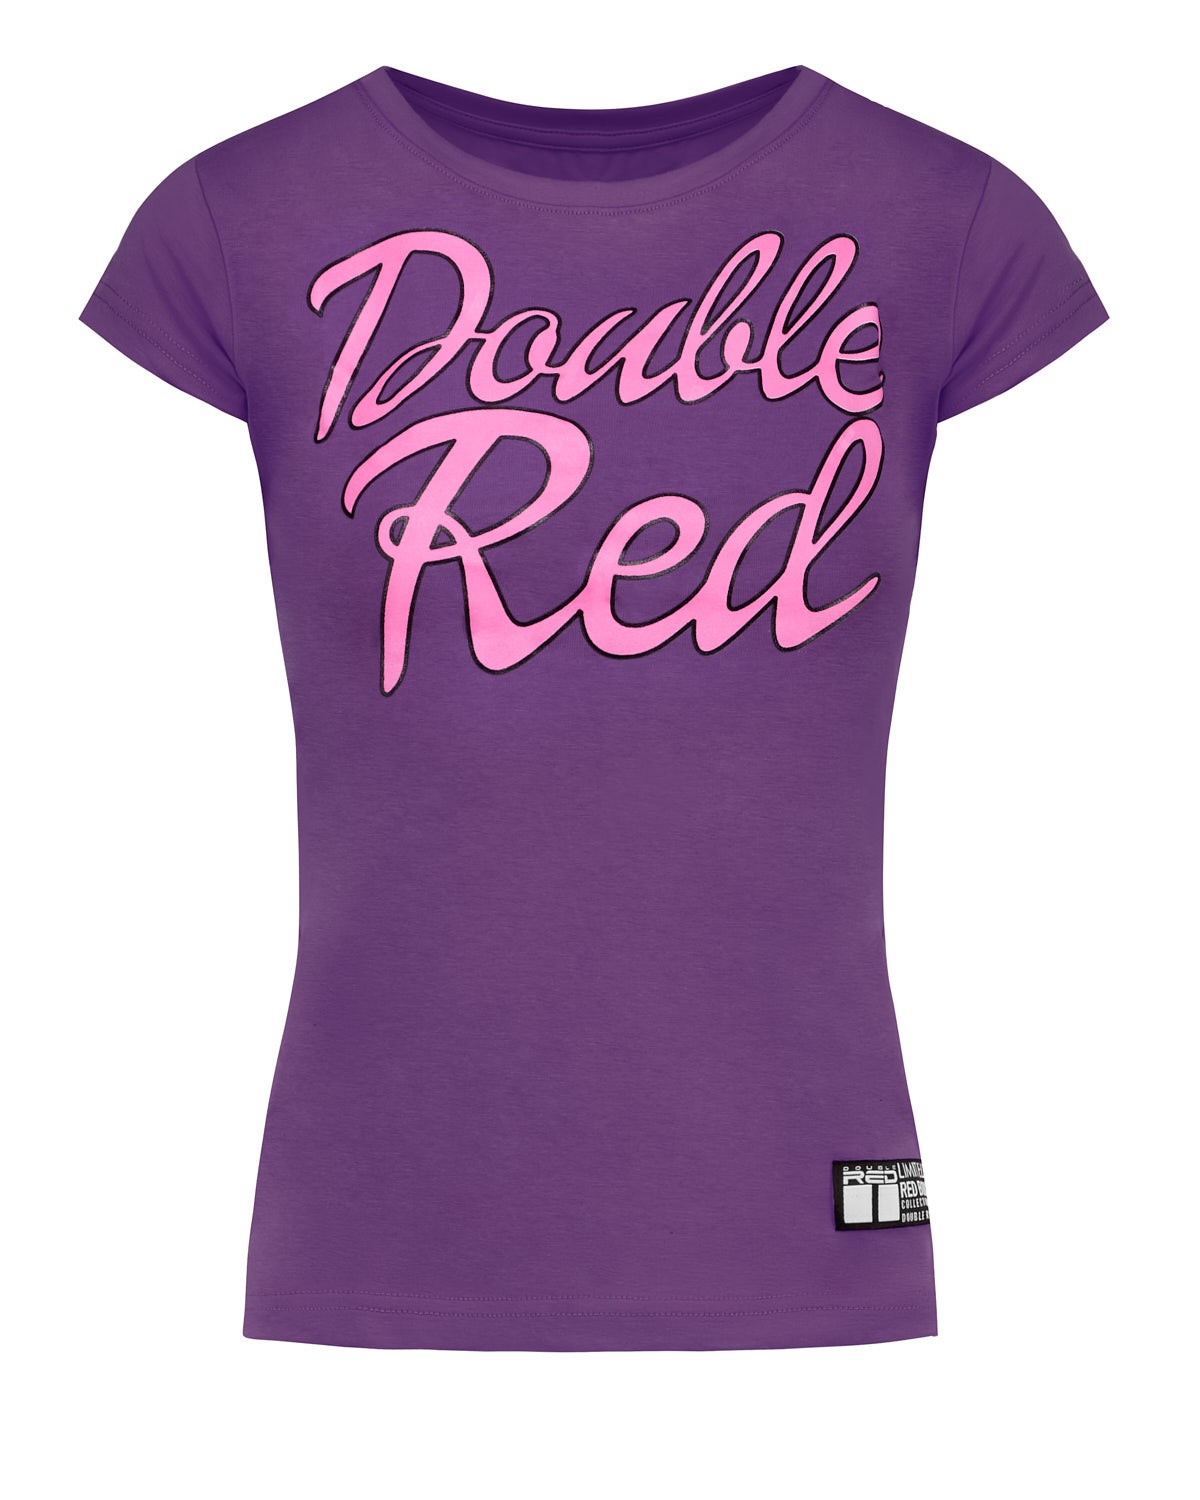 Red Body Collection T-Shirt Purple